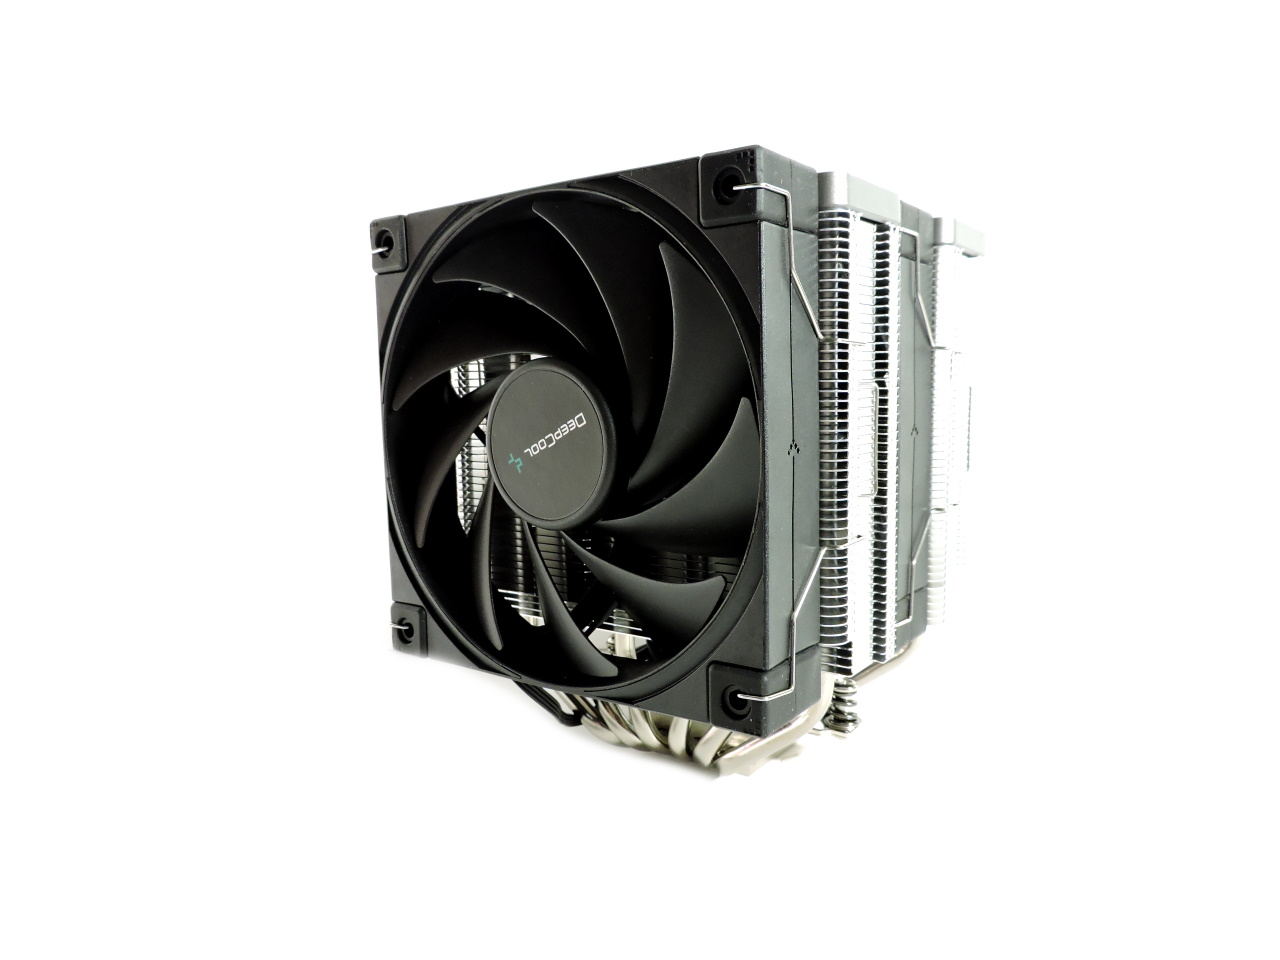 DeepCool AK620 CPU Cooler Review, Page 5 of 5